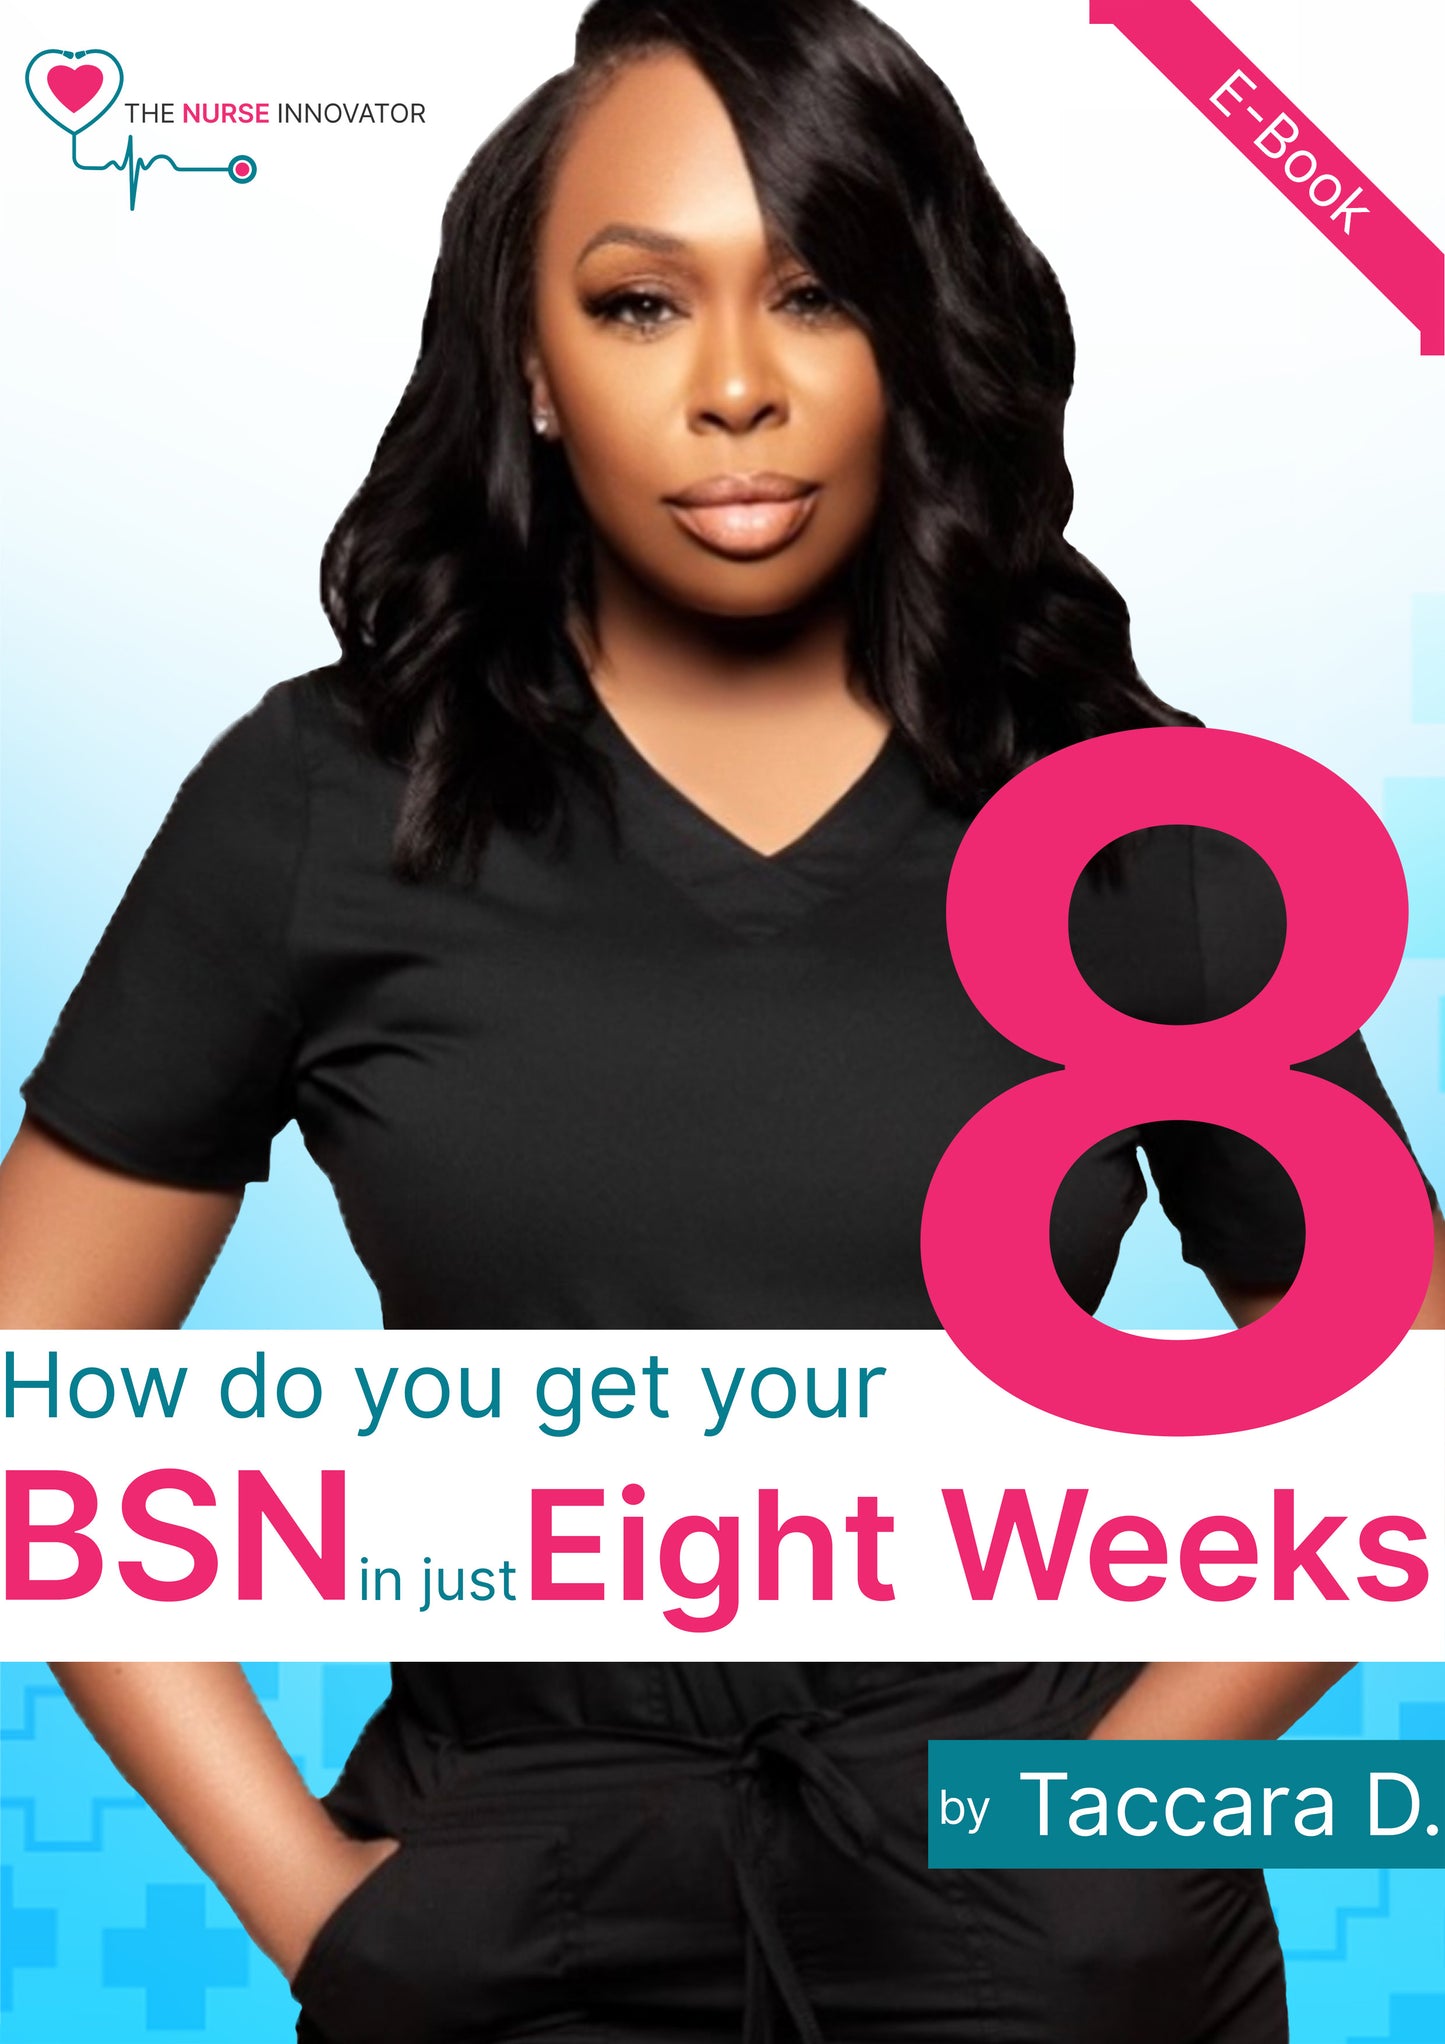 How do you get your BSN in 8 weeks? - E-book